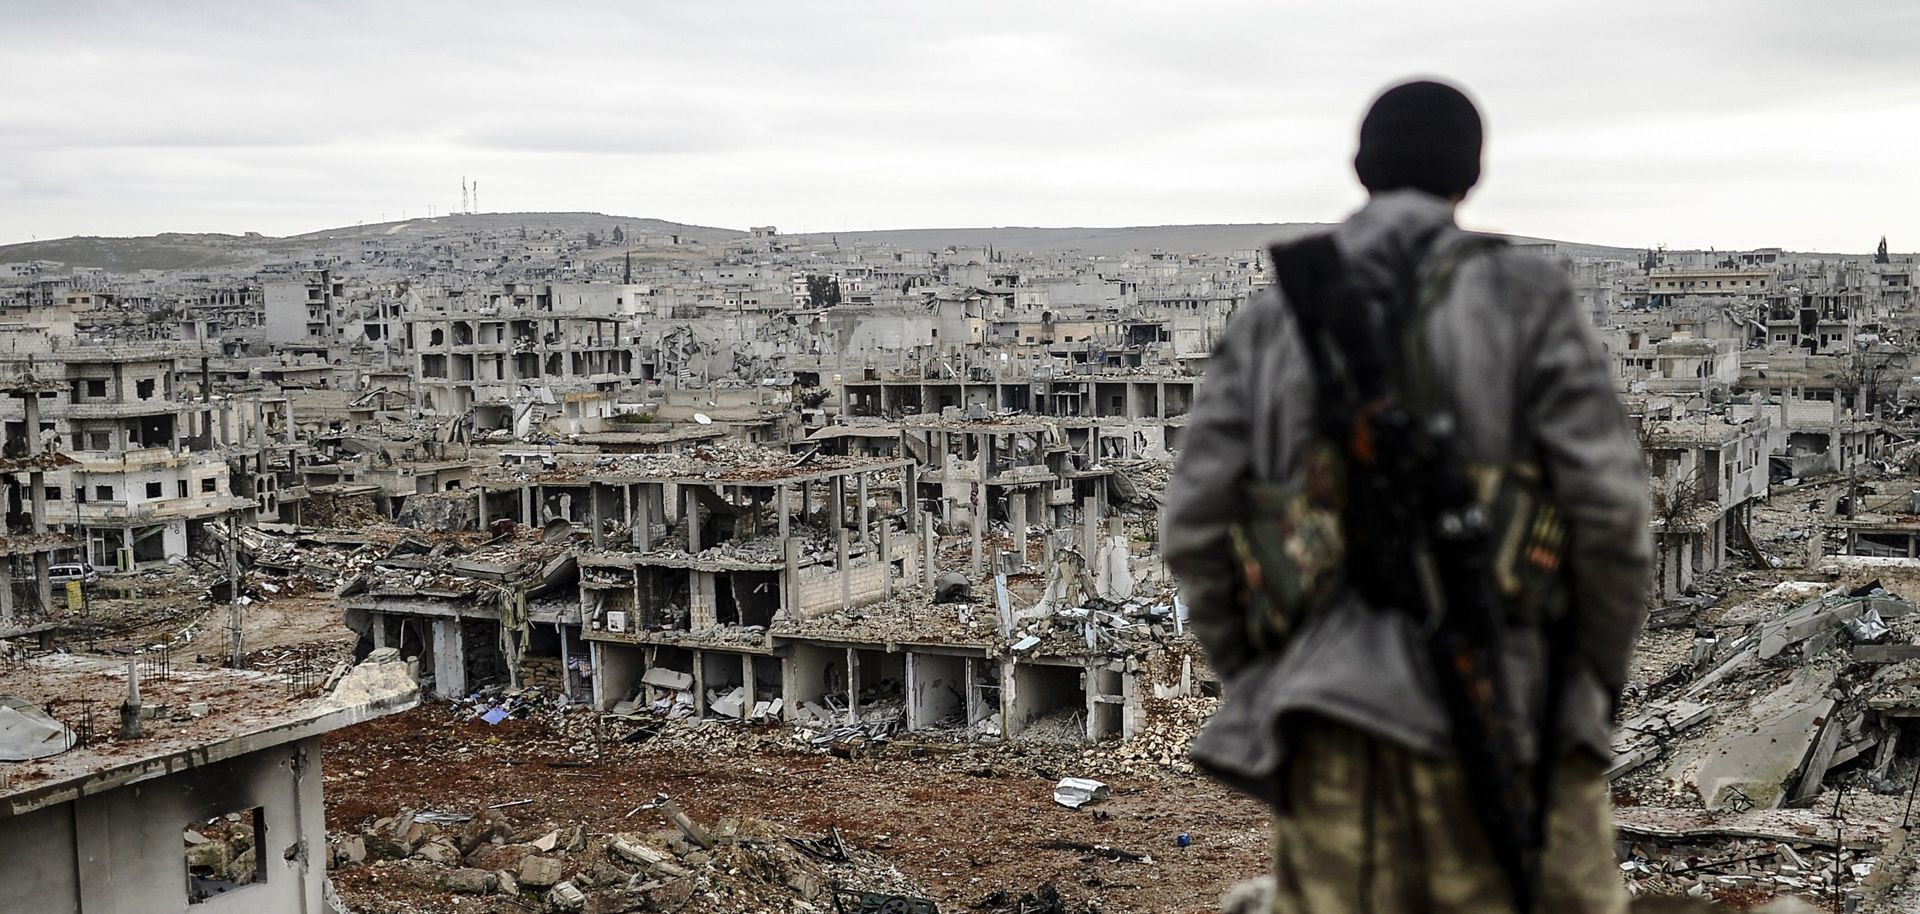 A Kurdish marksman stands on top of a building in the Syrian town of Kobani in January 2015. (BULENT KILIC/AFP/Getty Images)